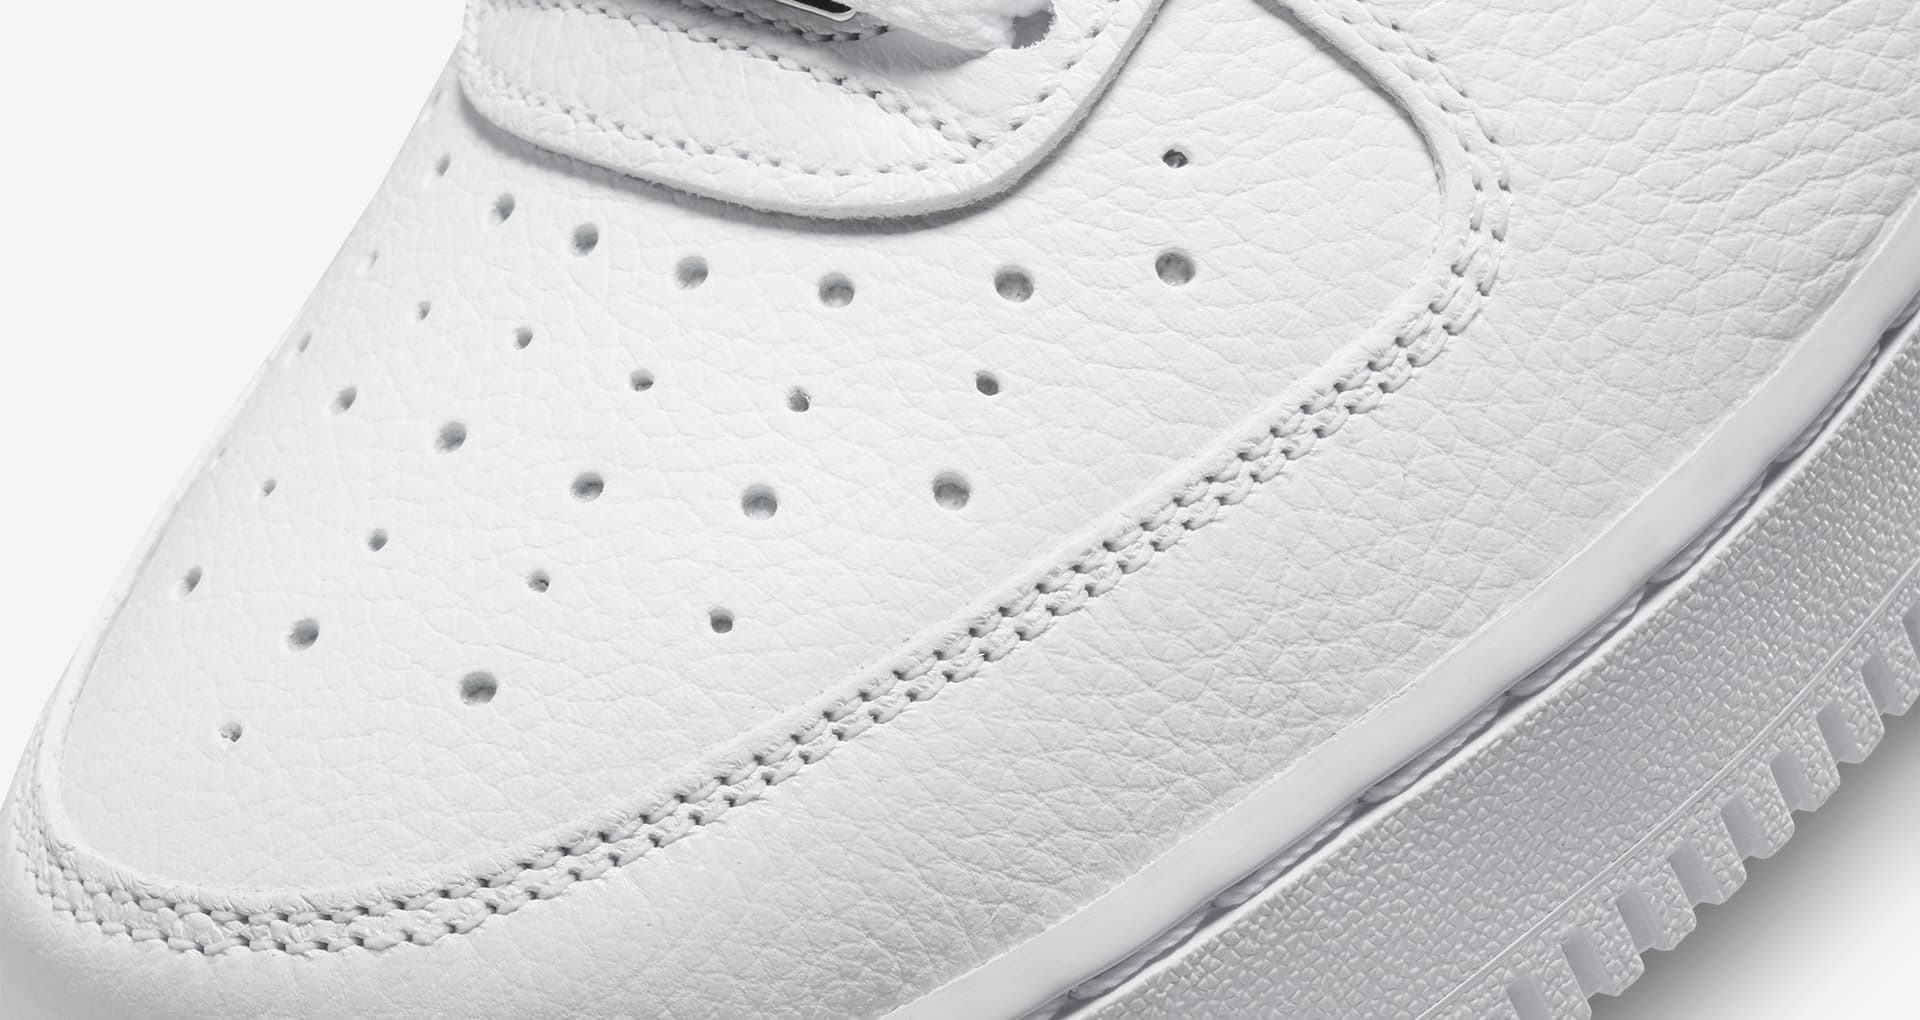 NOCTA Air Force 1 'White' (CZ8065-100) release date. Nike SNKRS CZ